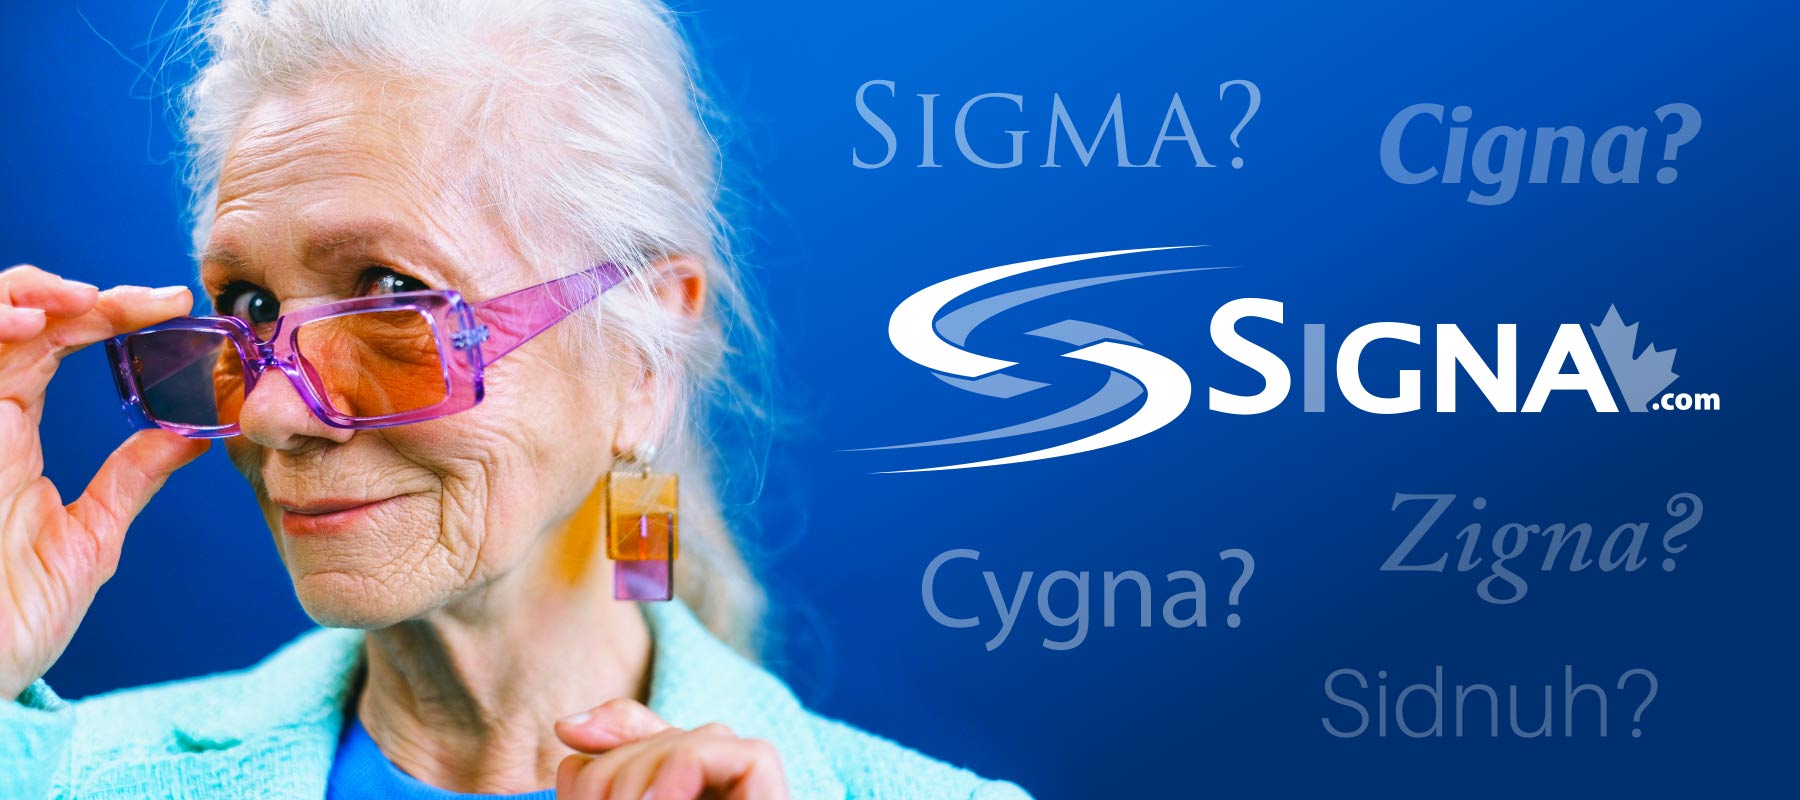 SiGMA Computer Systems: Embracing Our Name's Quirkiness